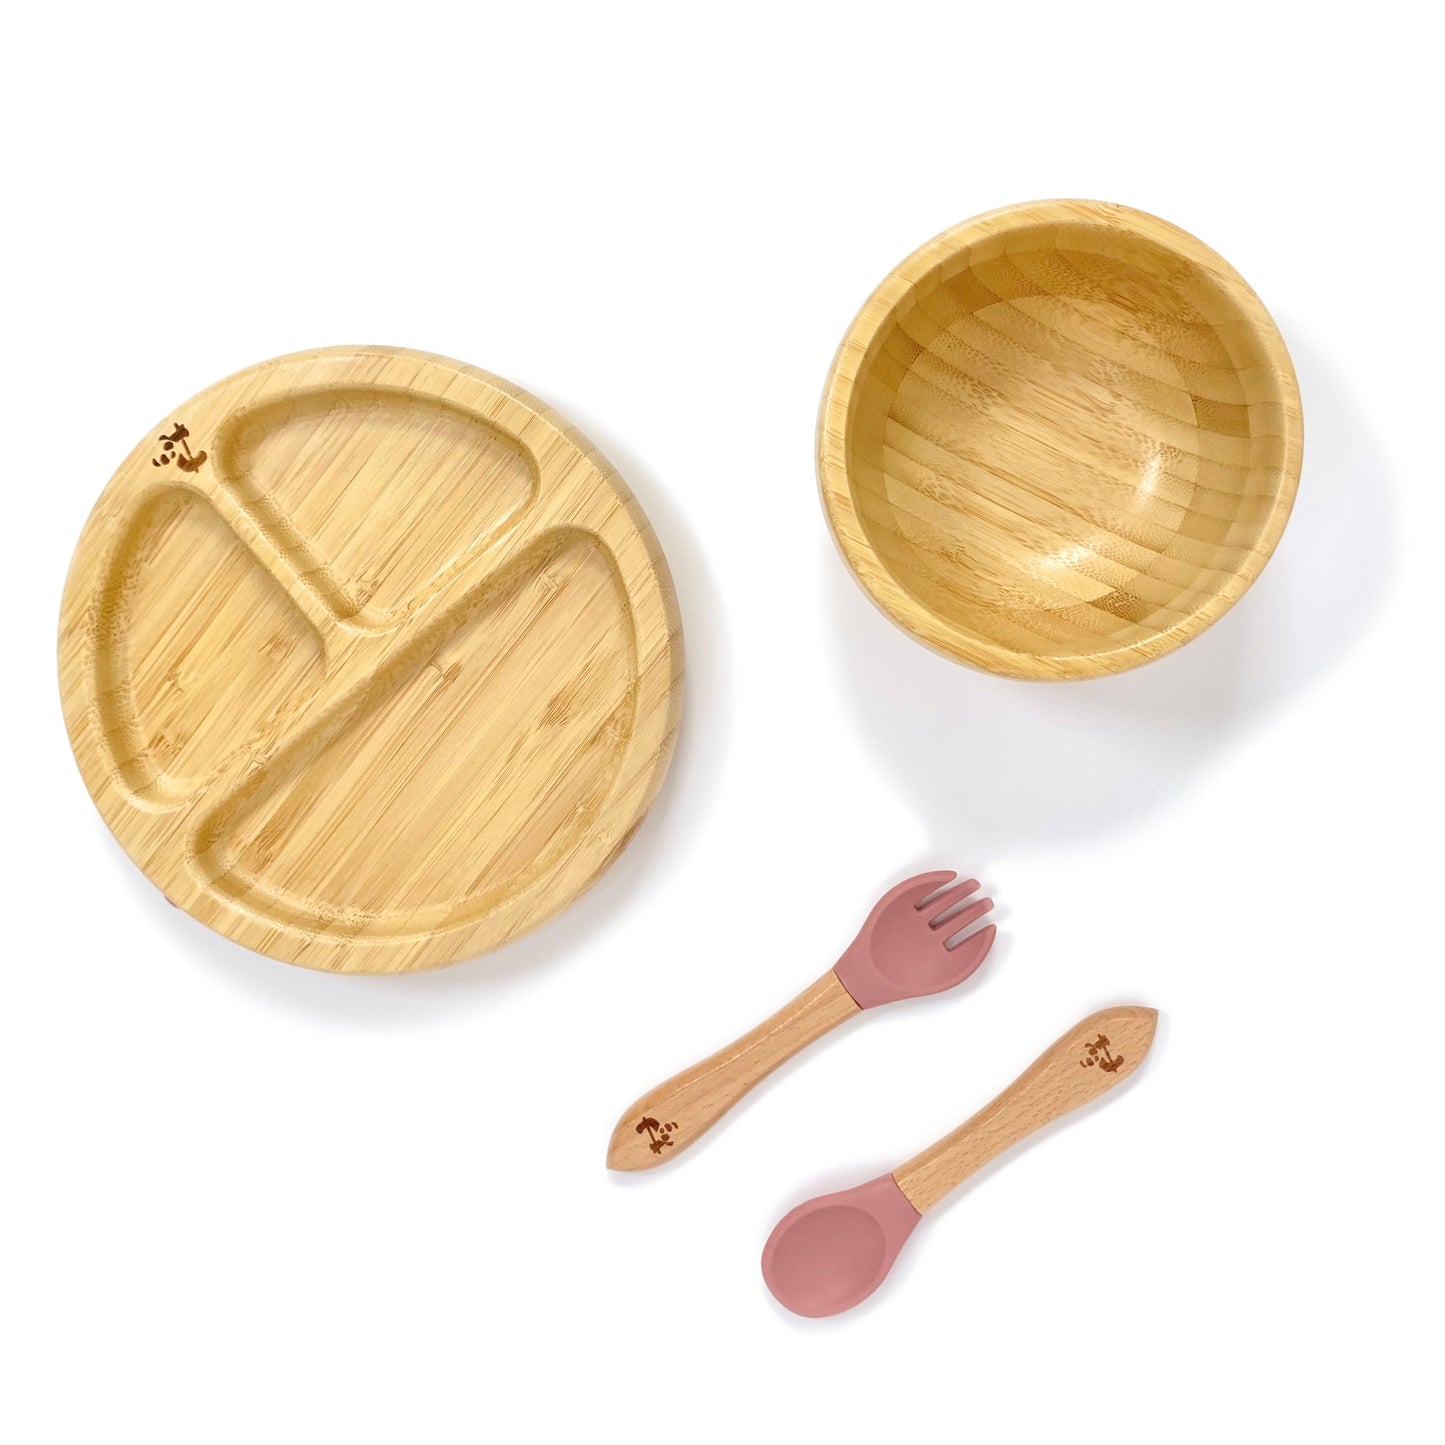 A children’s bamboo tableware set, including bamboo section plate with blush pink silicone suction ring, bamboo bowl with blush pink silicone suction ring and matching bamboo and silicone cutlery.